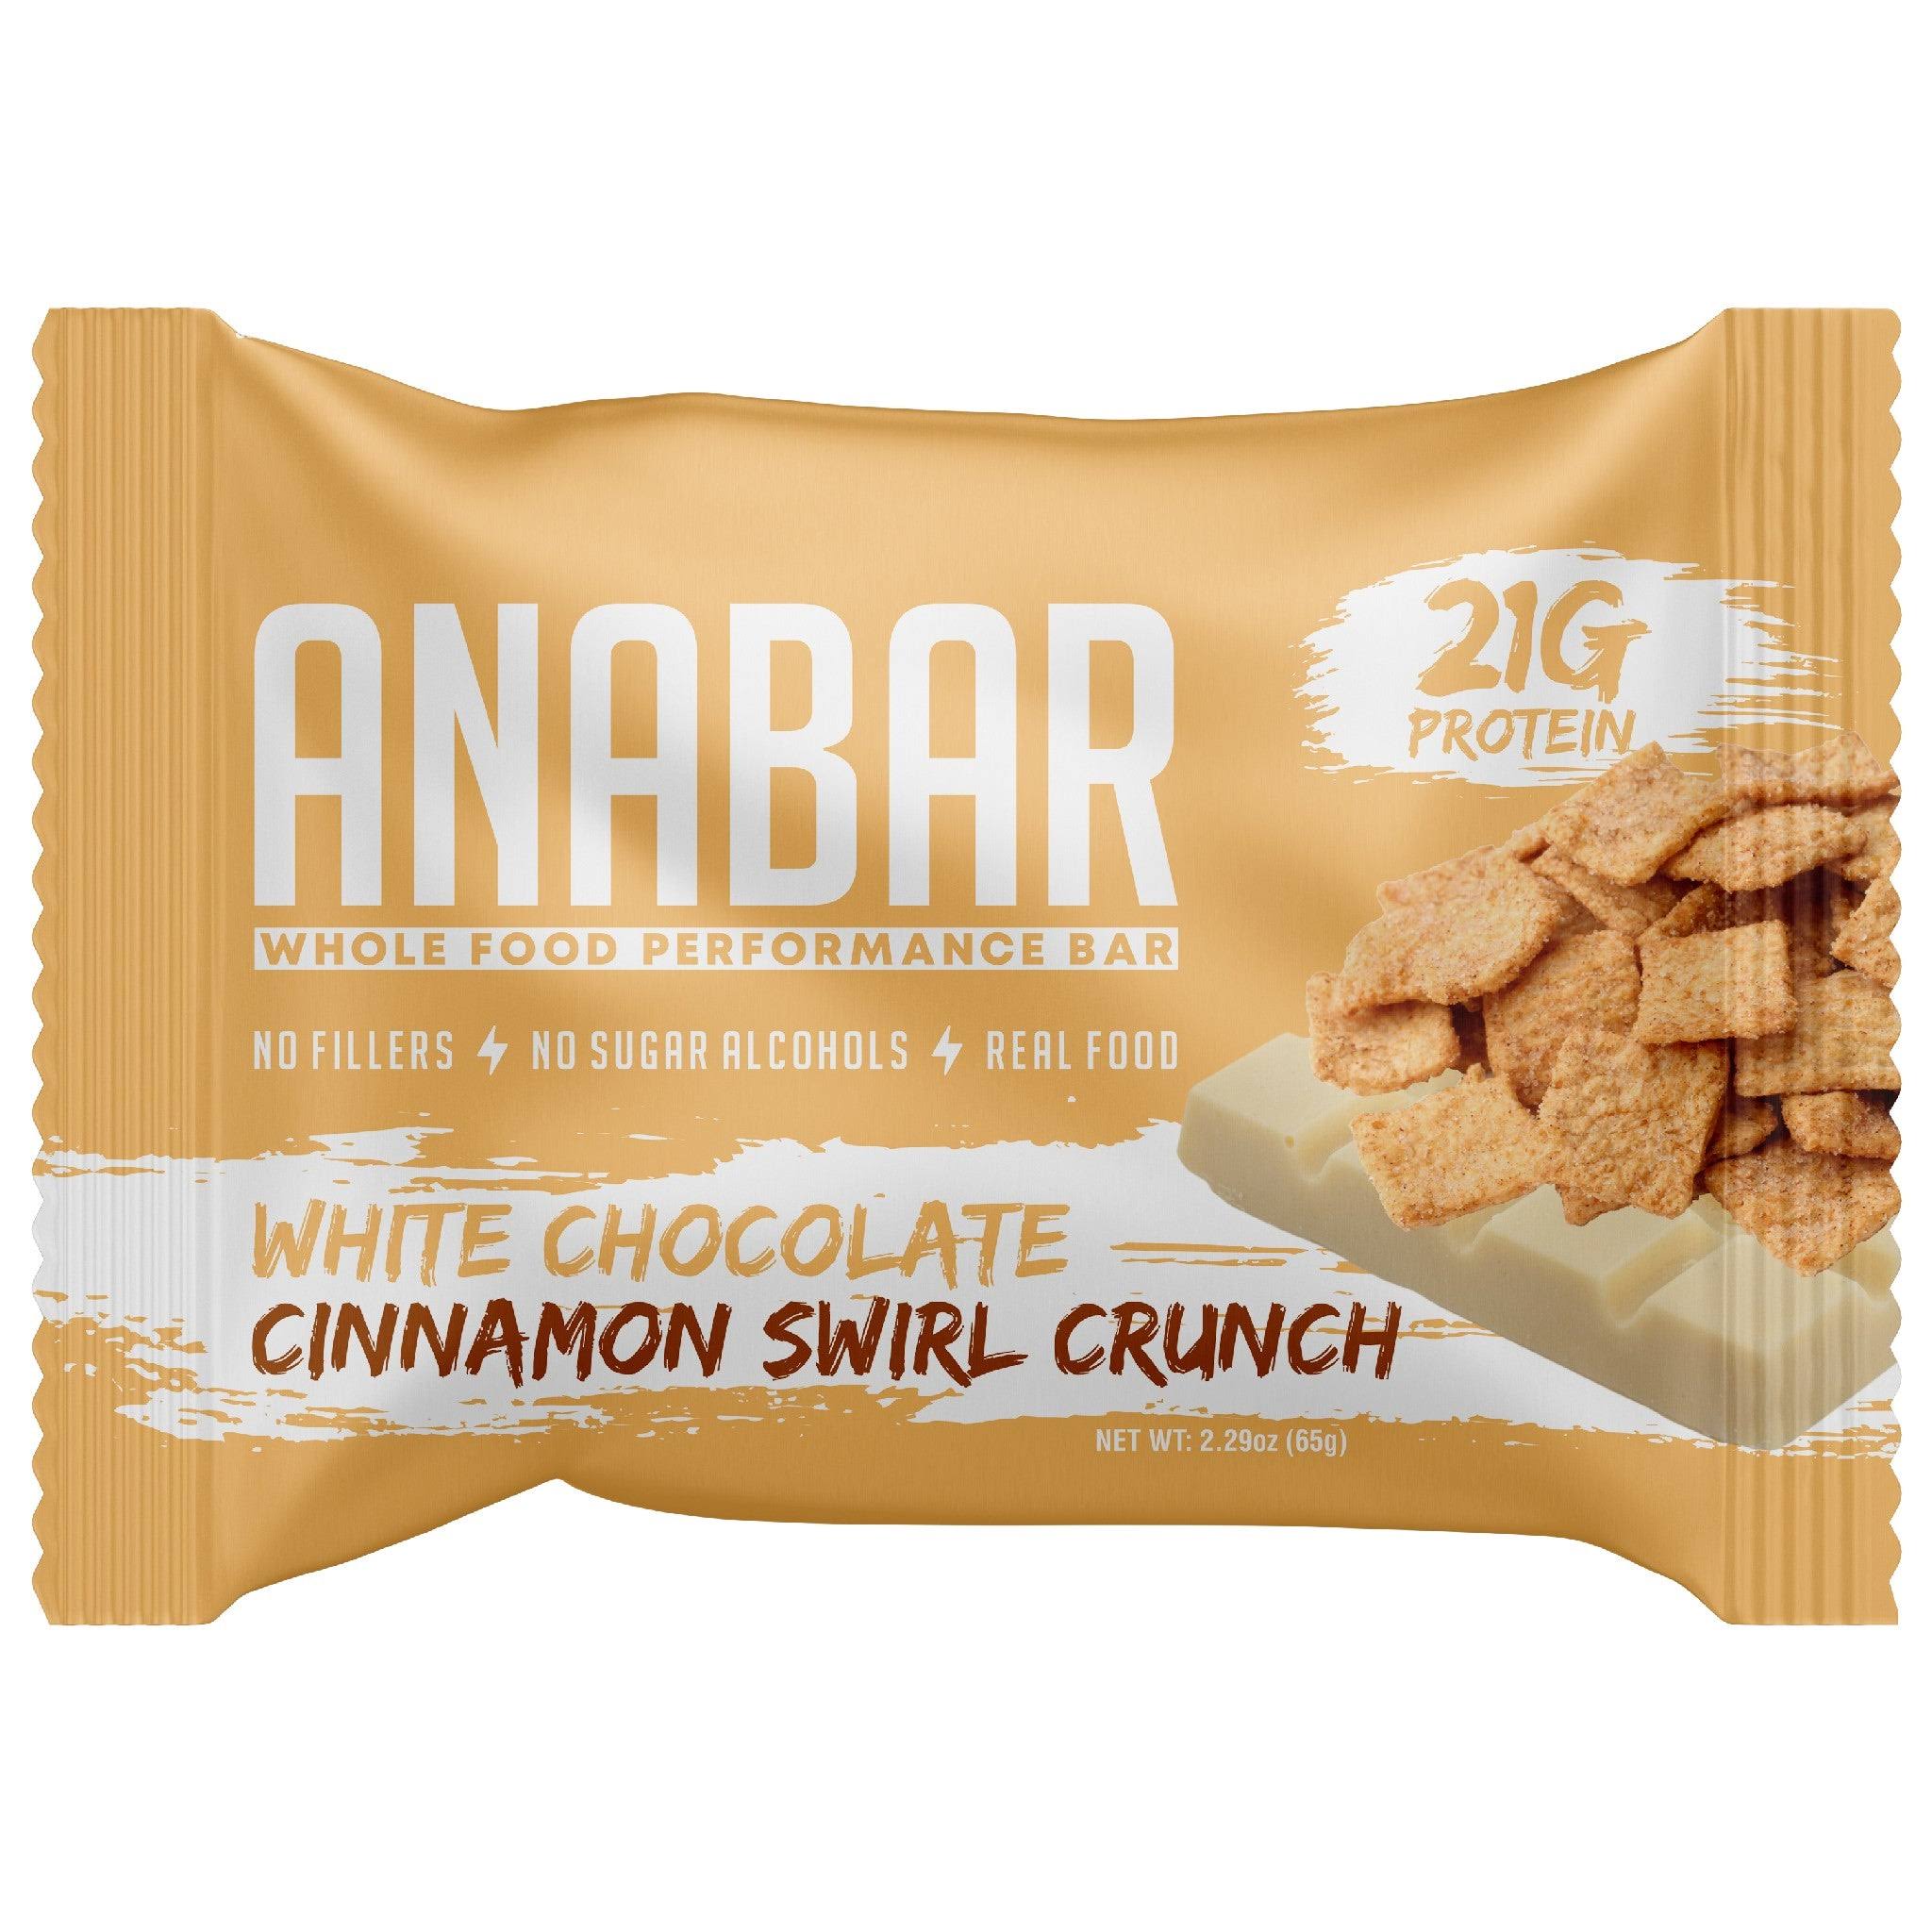 Anabar White Chocolate Fruity Cereal Crunch Performance Bar 2.29 oz